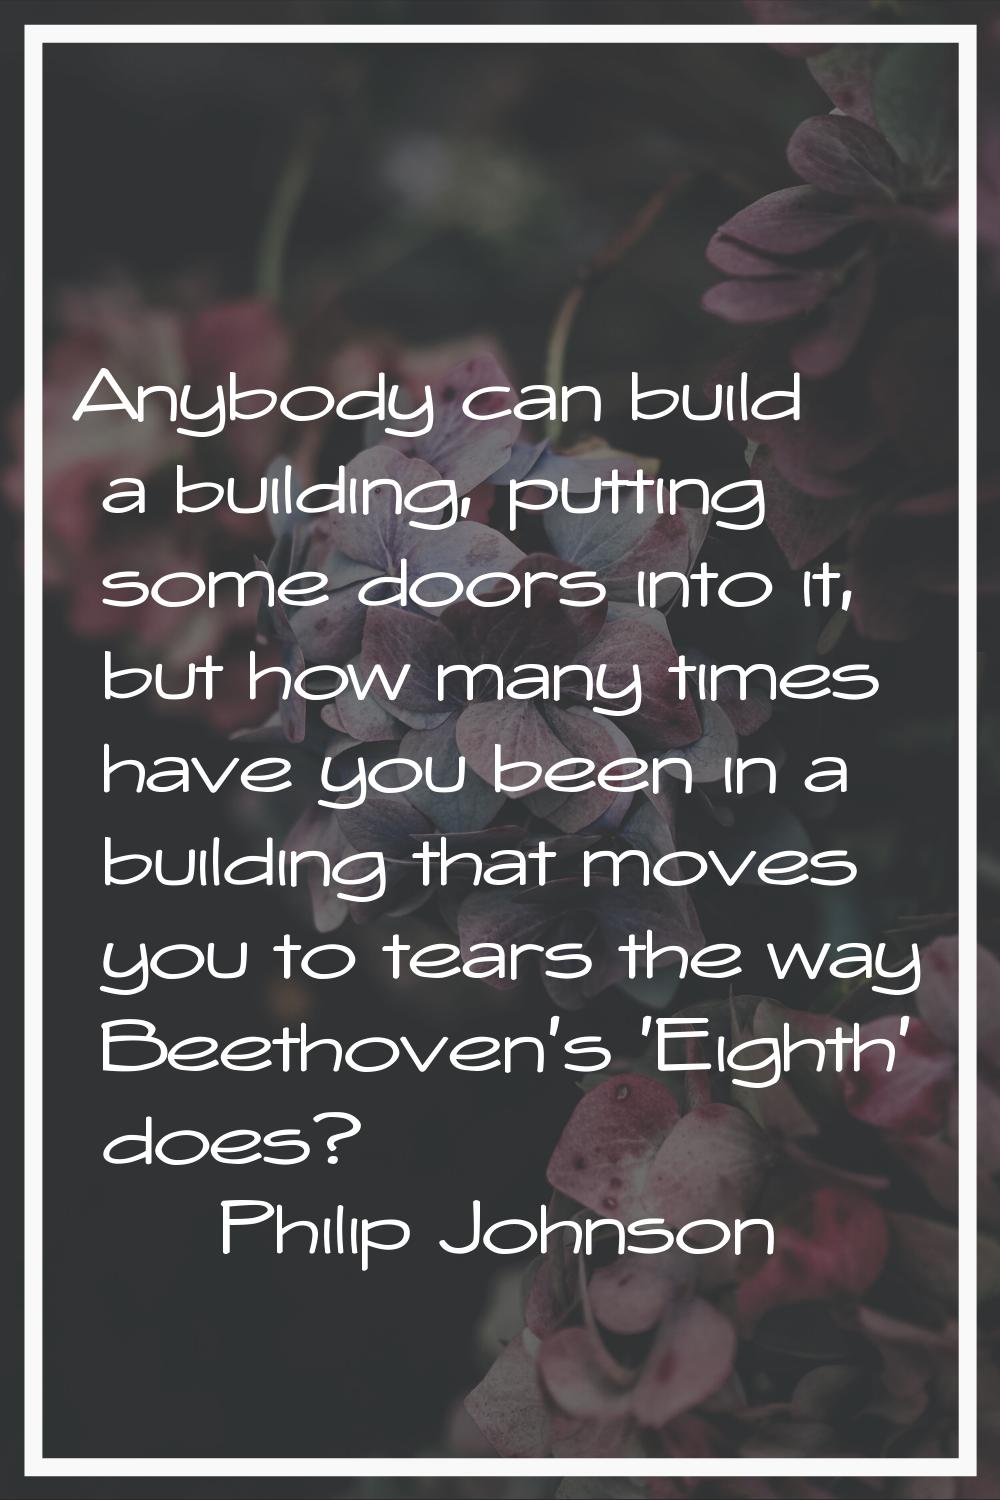 Anybody can build a building, putting some doors into it, but how many times have you been in a bui